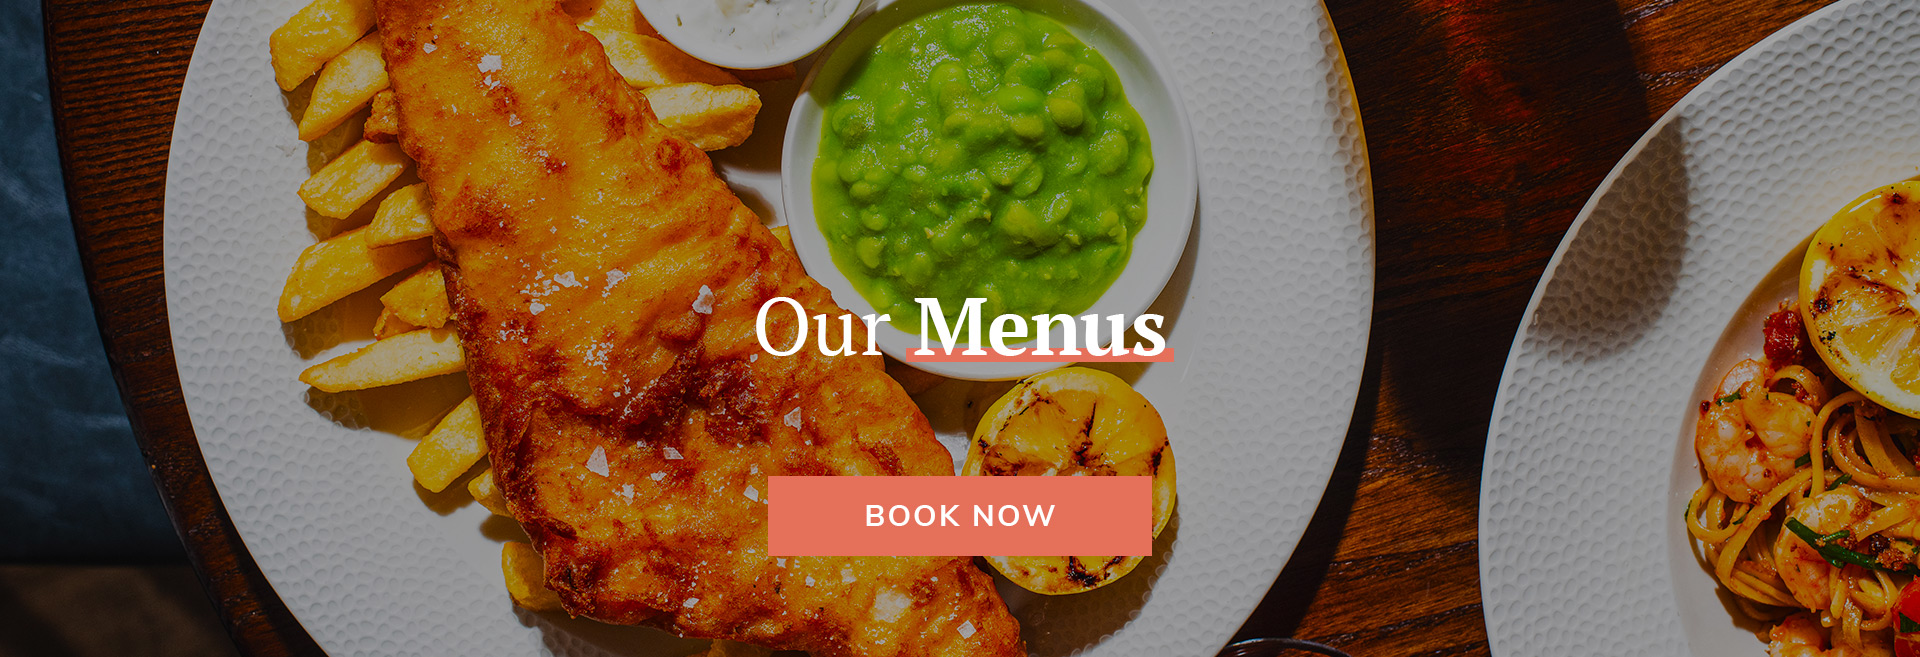 Book Now at The Cuckfield